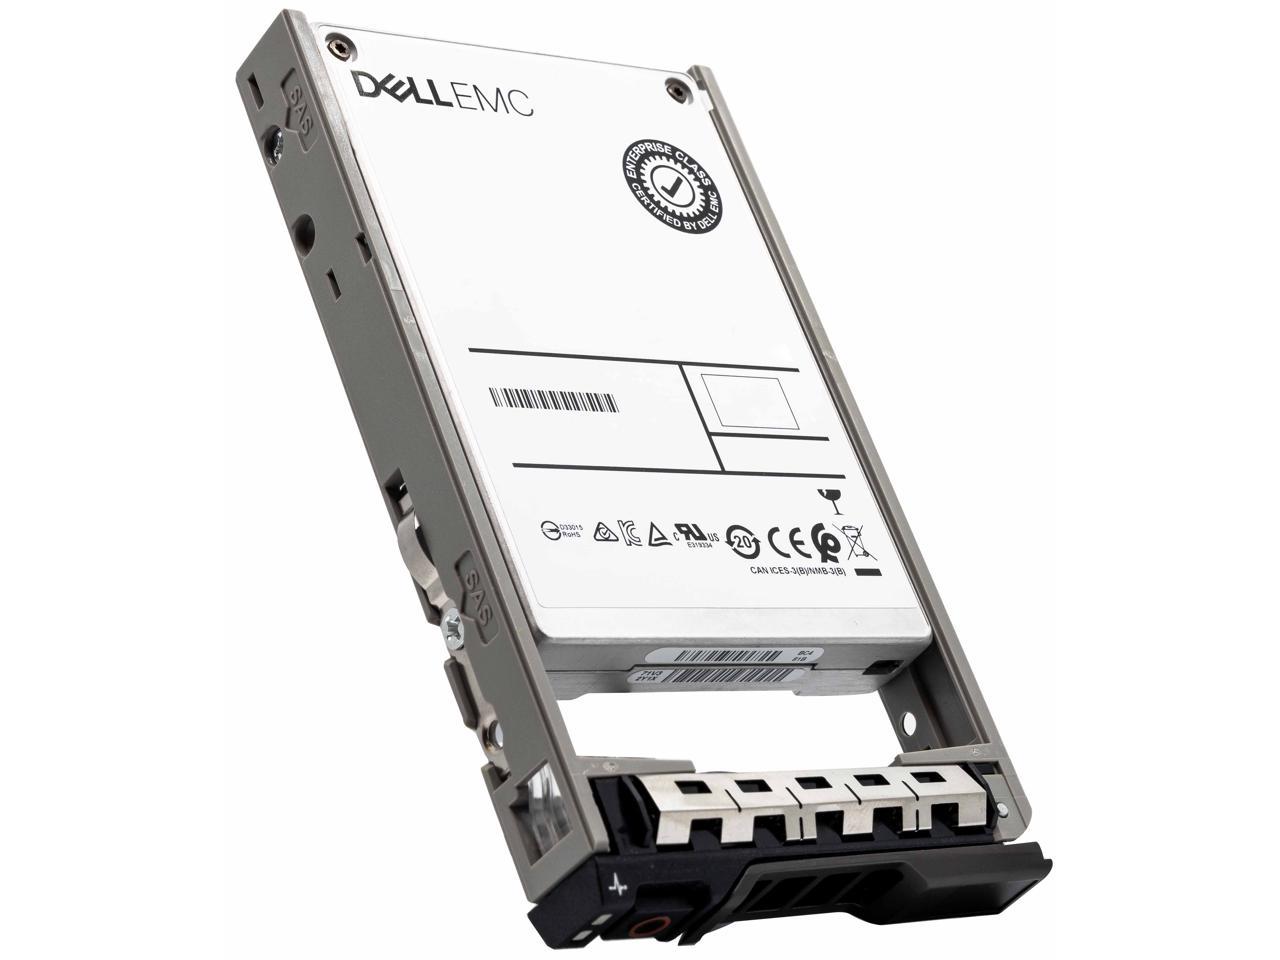 Dell G13 400-AOPV 1.92TB SATA 6Gb/s 2.5" Manufacturer Recertified SSD